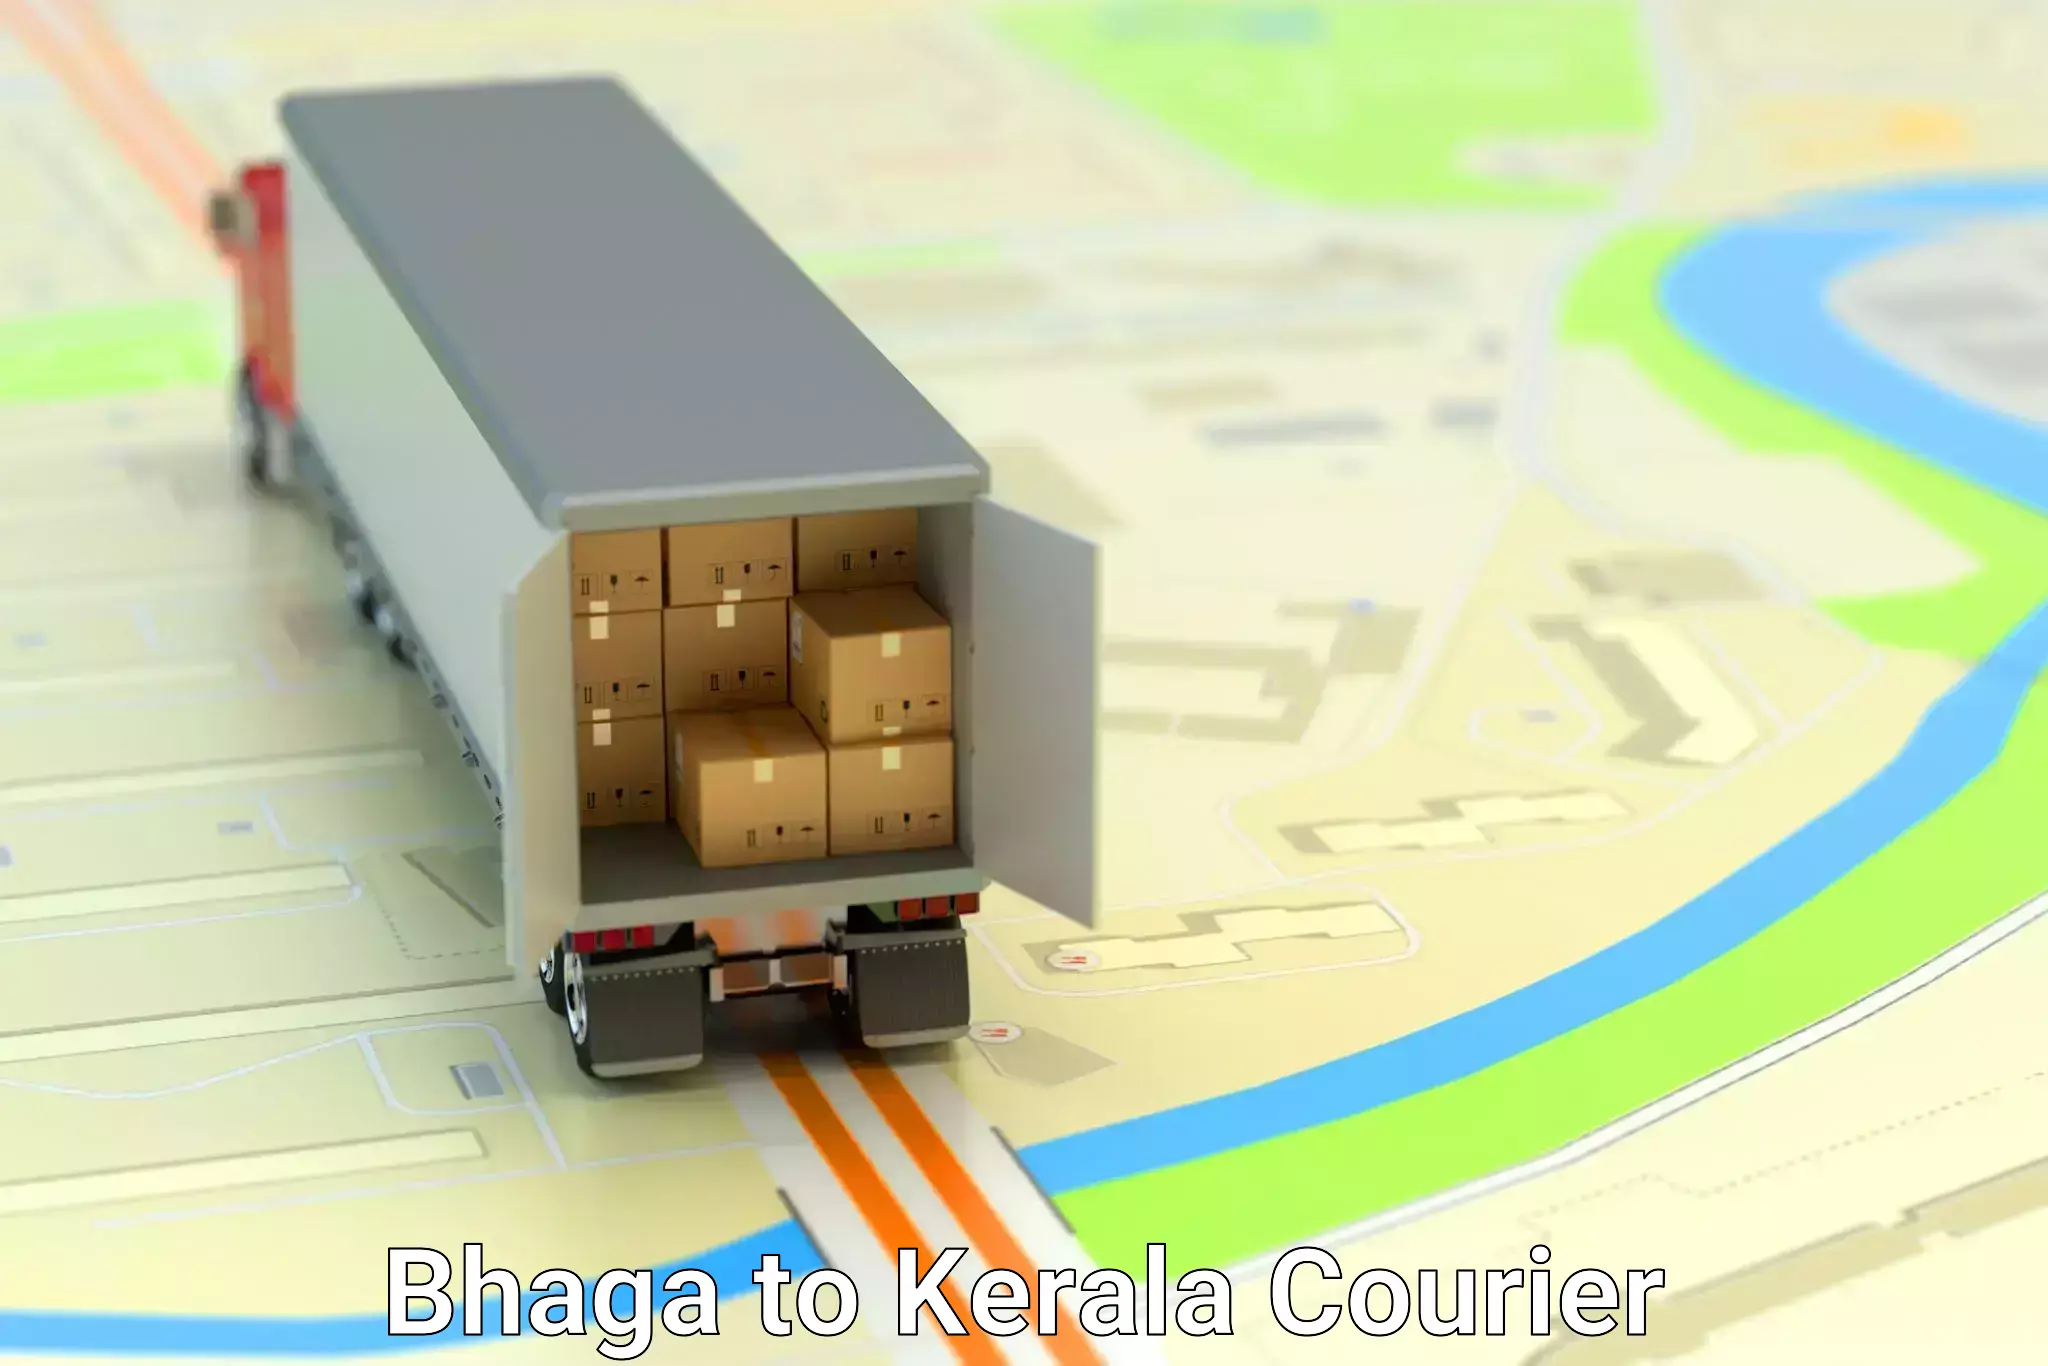 Same-day delivery solutions Bhaga to Perumbavoor